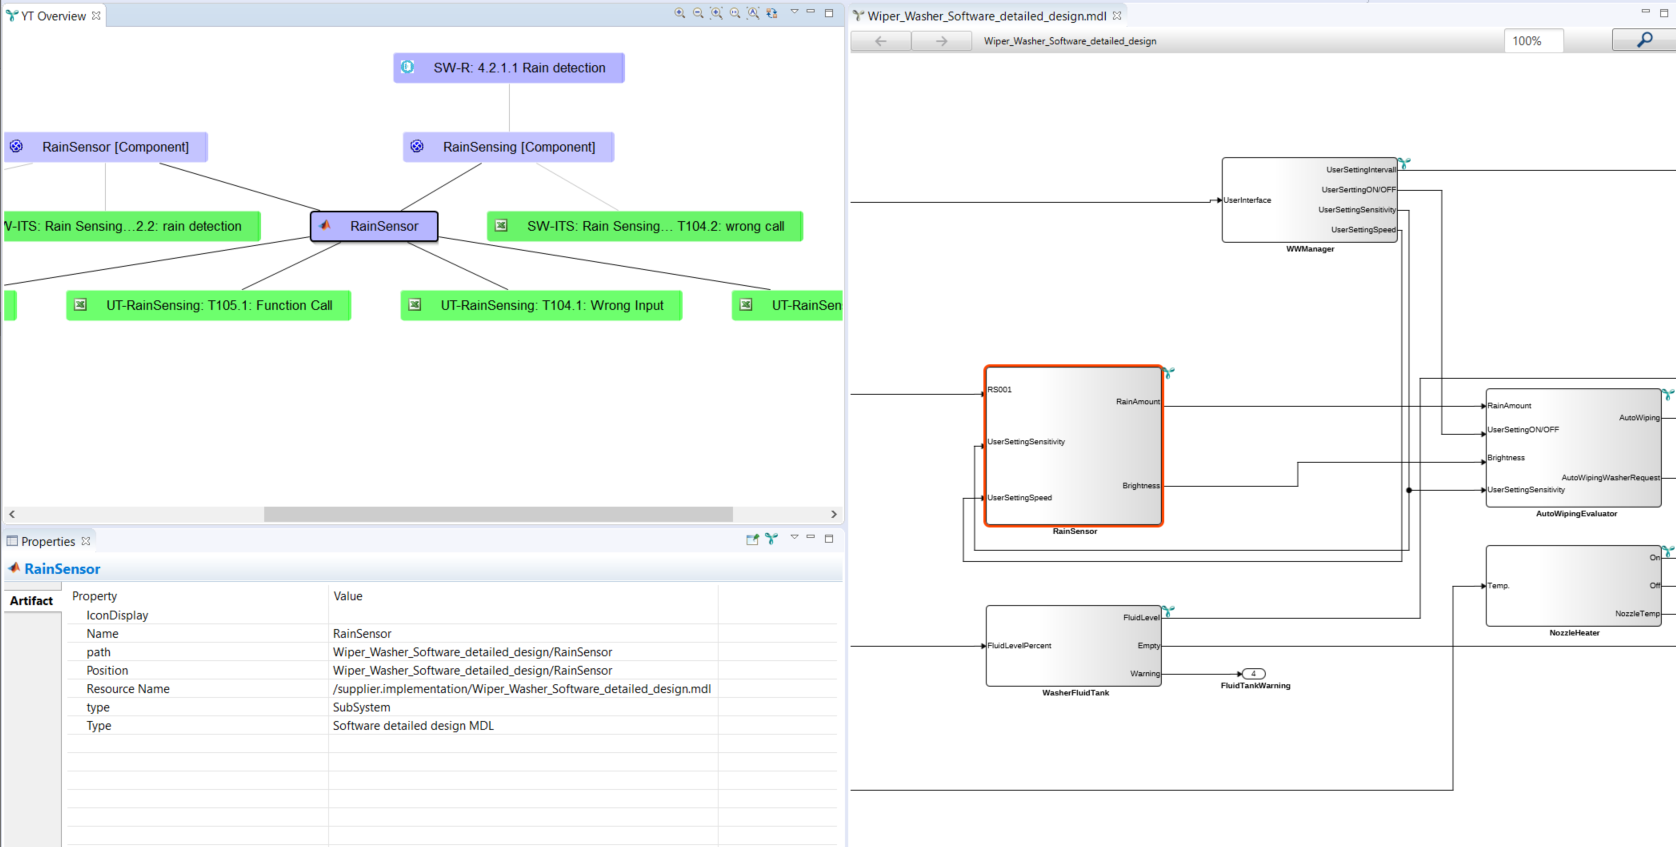 Visualization of a Simulink model with traces in itemis ANALYZE